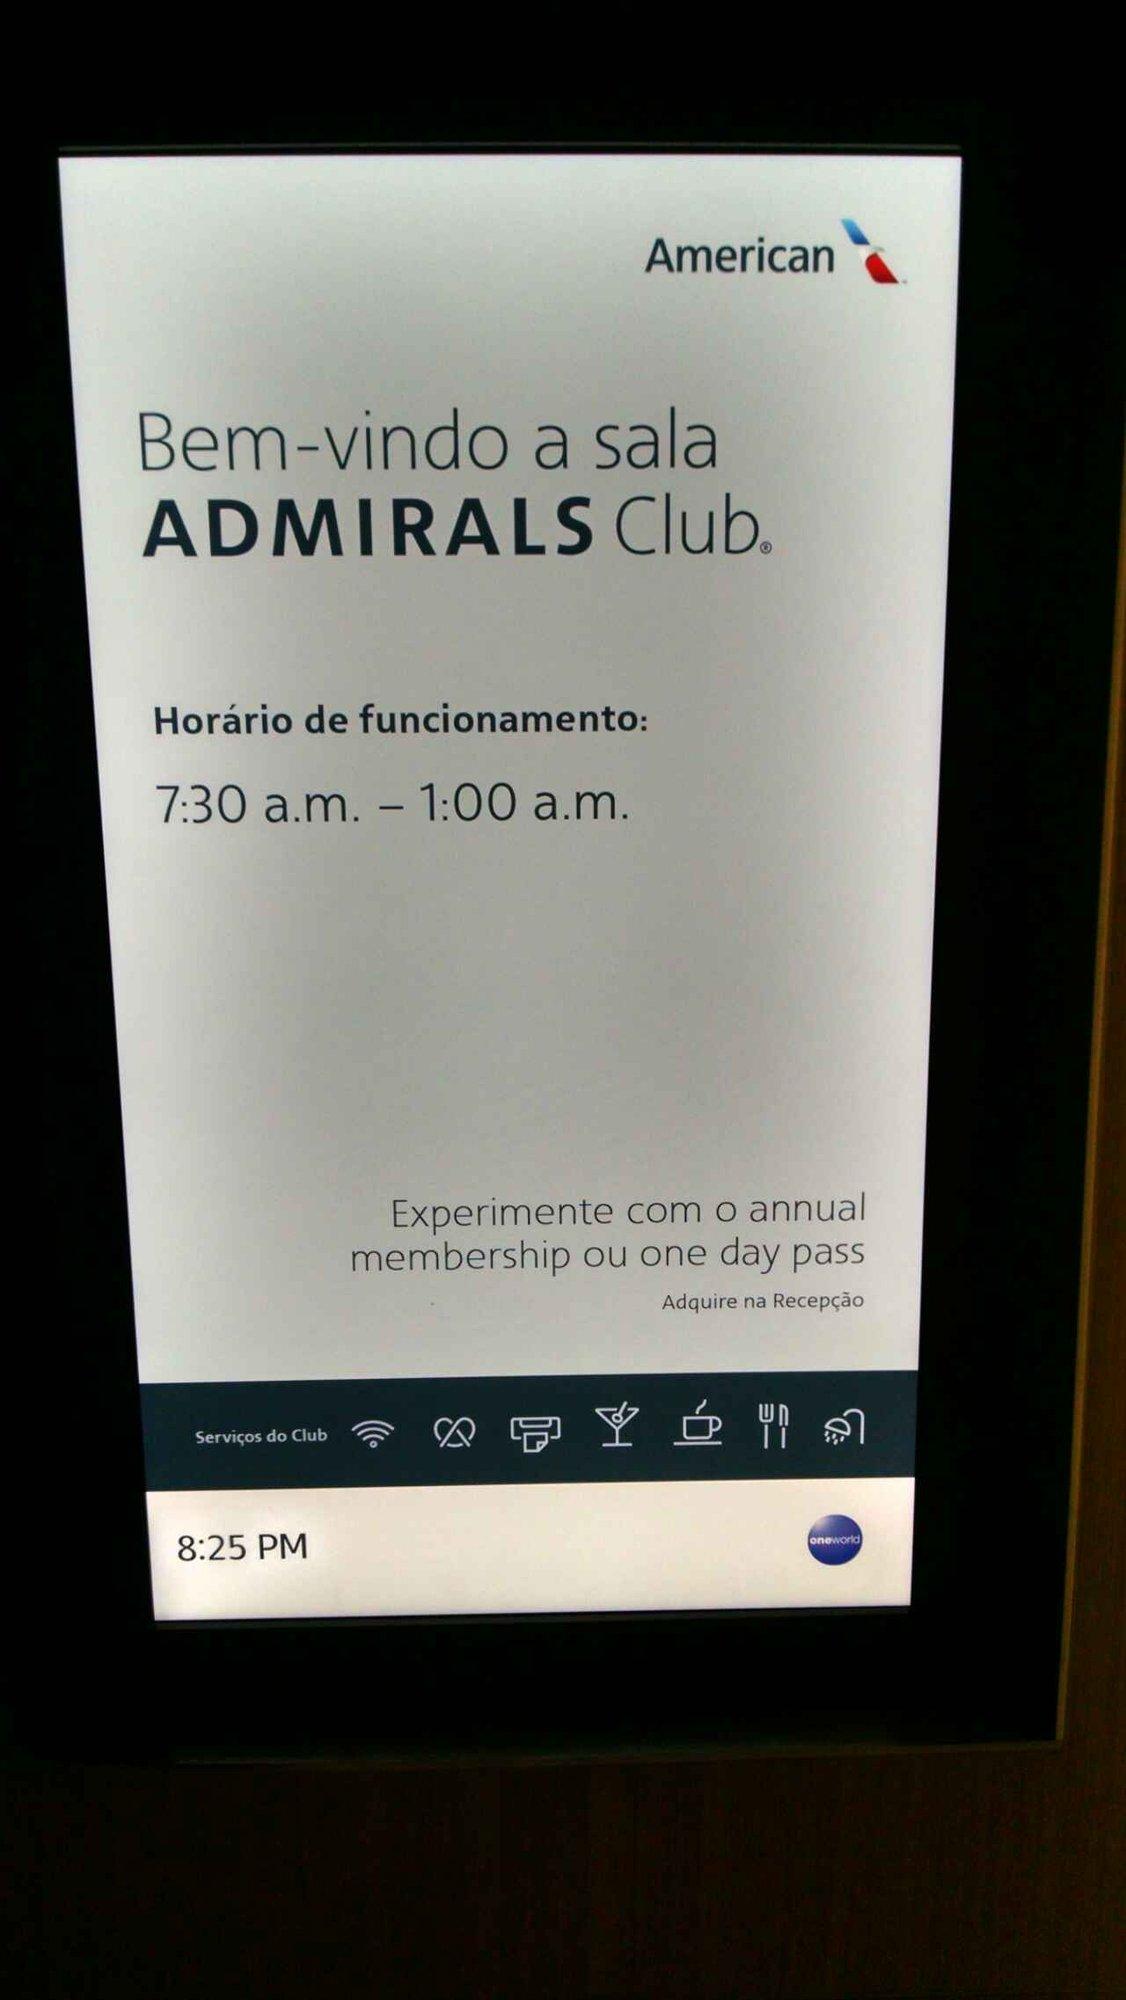 American Airlines Admirals Club image 4 of 30